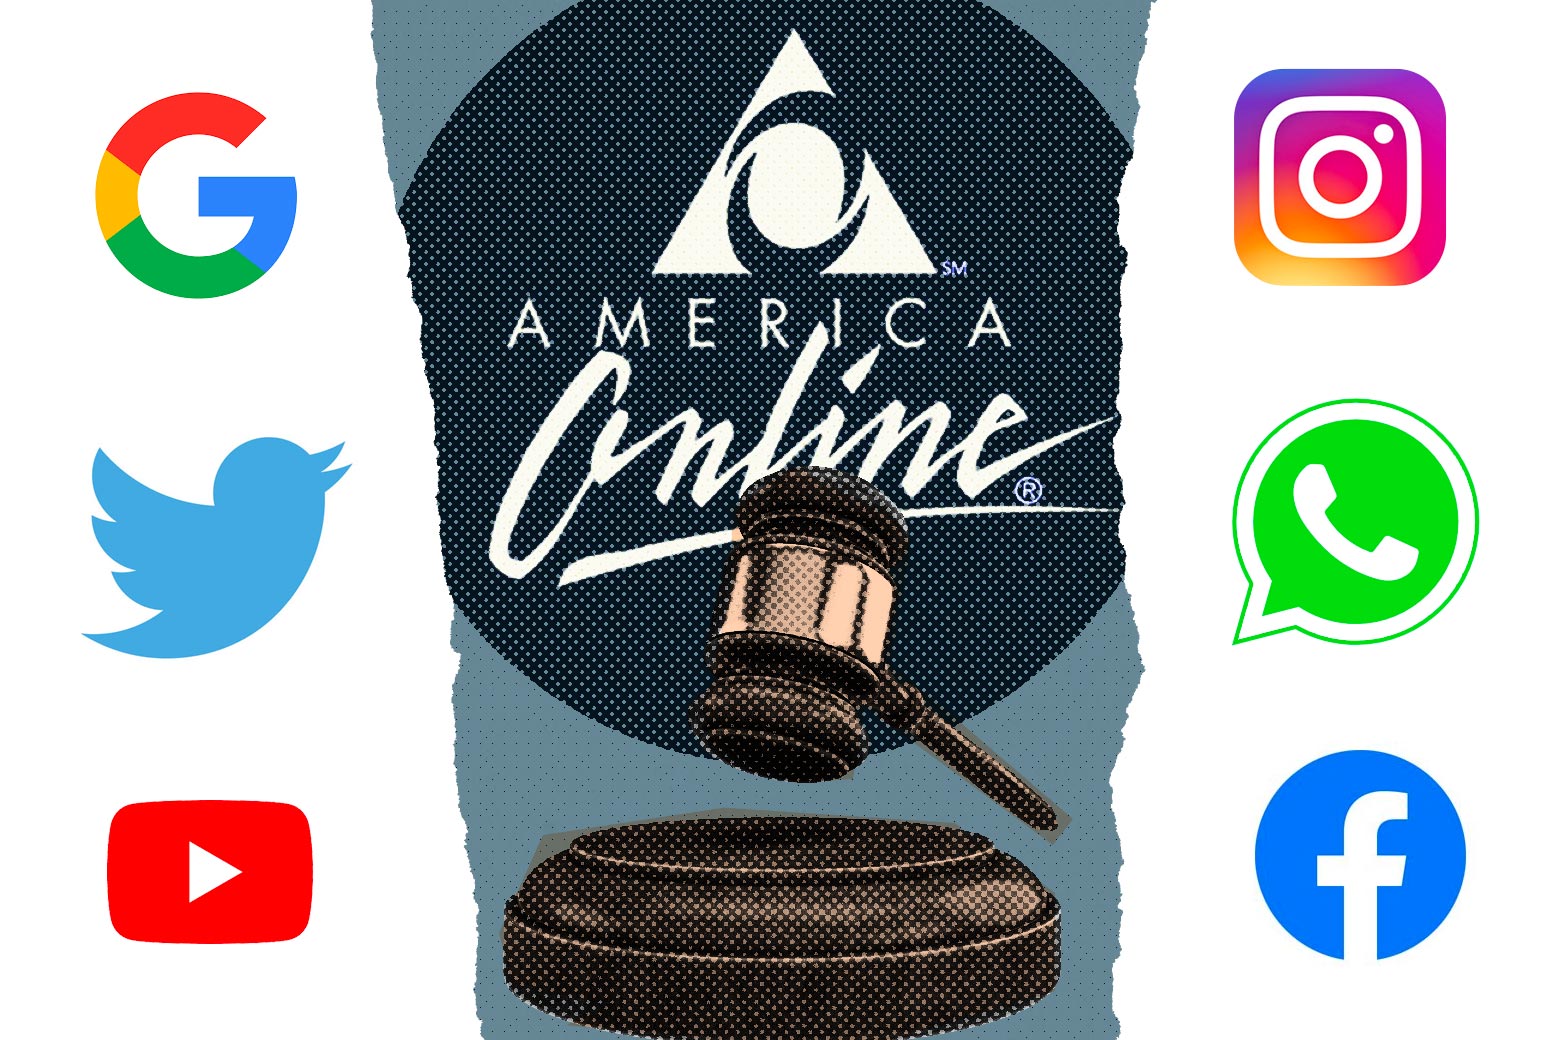 The American Online logo is seen in the center, above a judge's gavel. The Google, Twitter, and YouTube logos are seen on the left side, and the Instagram, WhatsApp, and Facebook logos are seen on the right side.